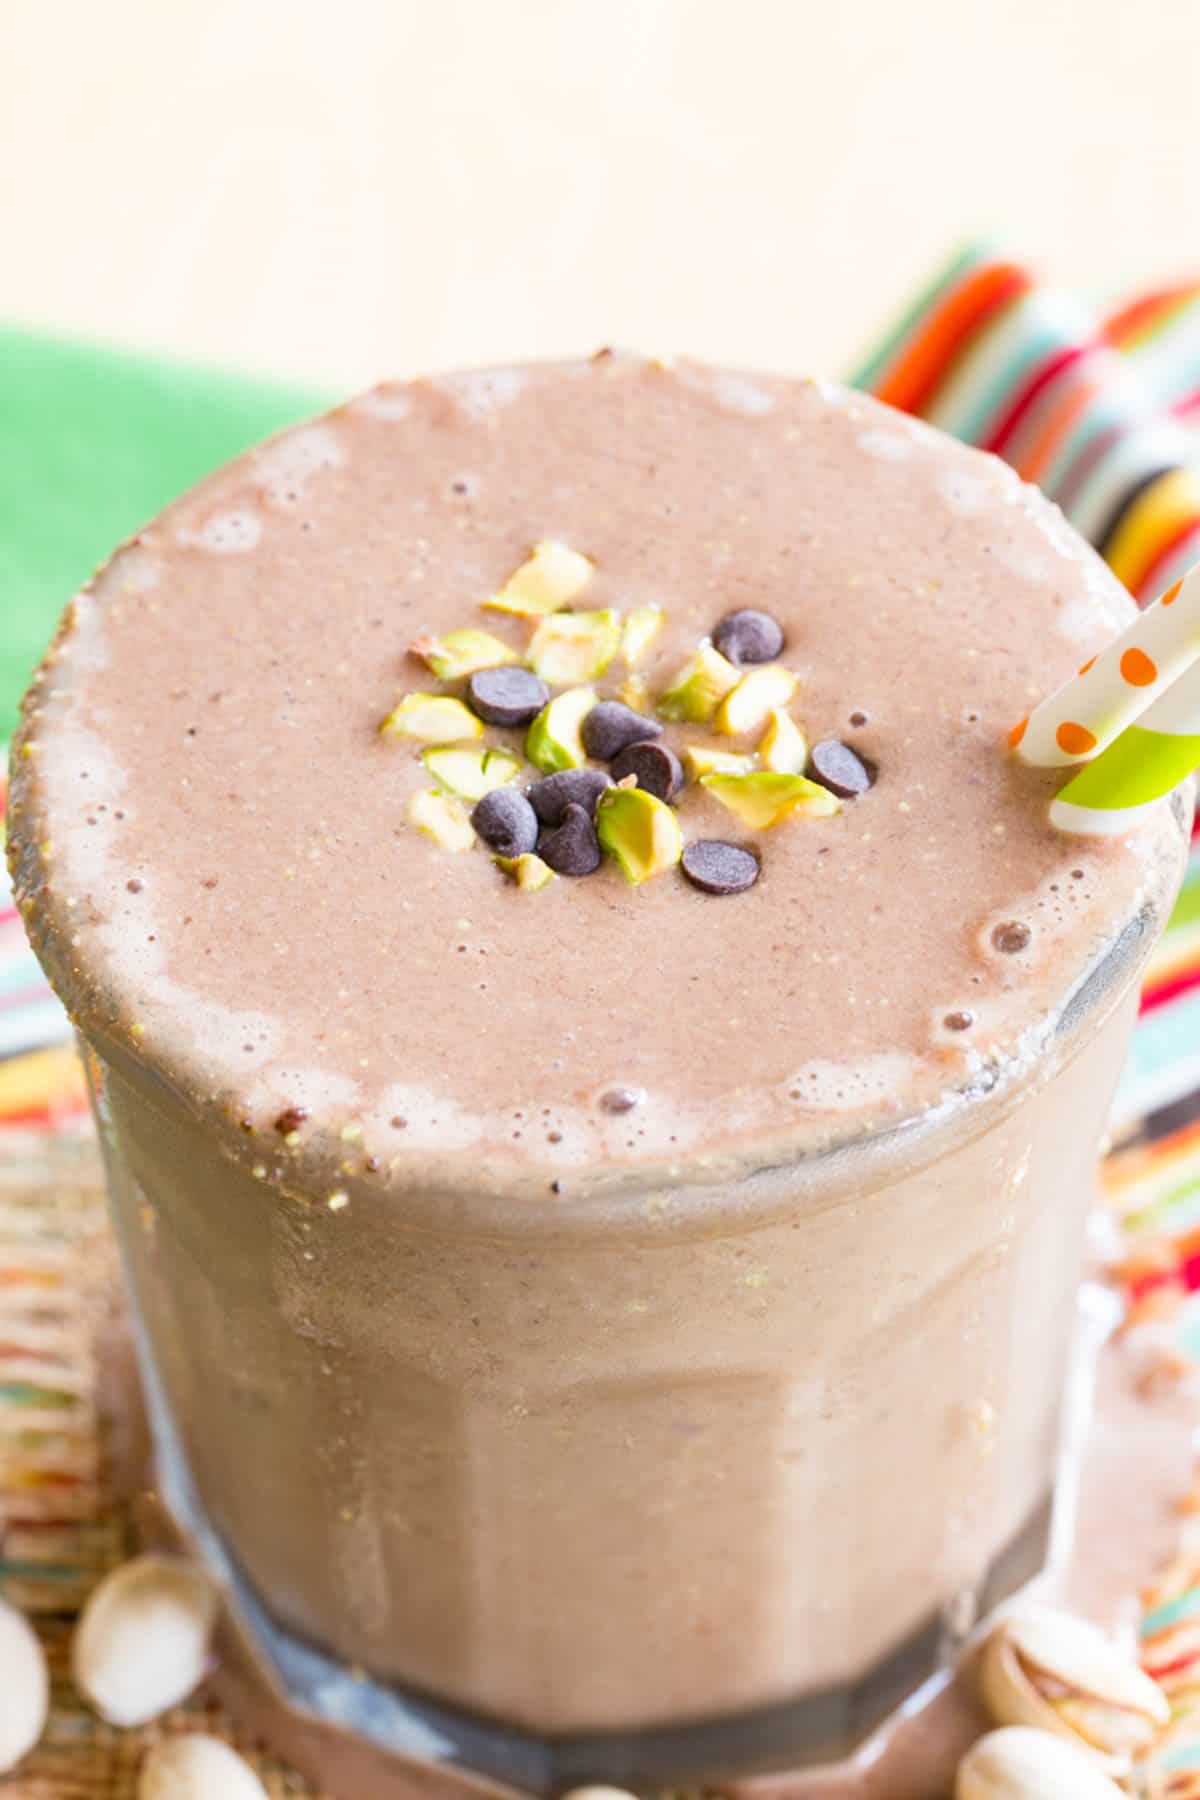 A closeup of the chocolate chip and pistachio garnish on top of a chocolate smoothie.